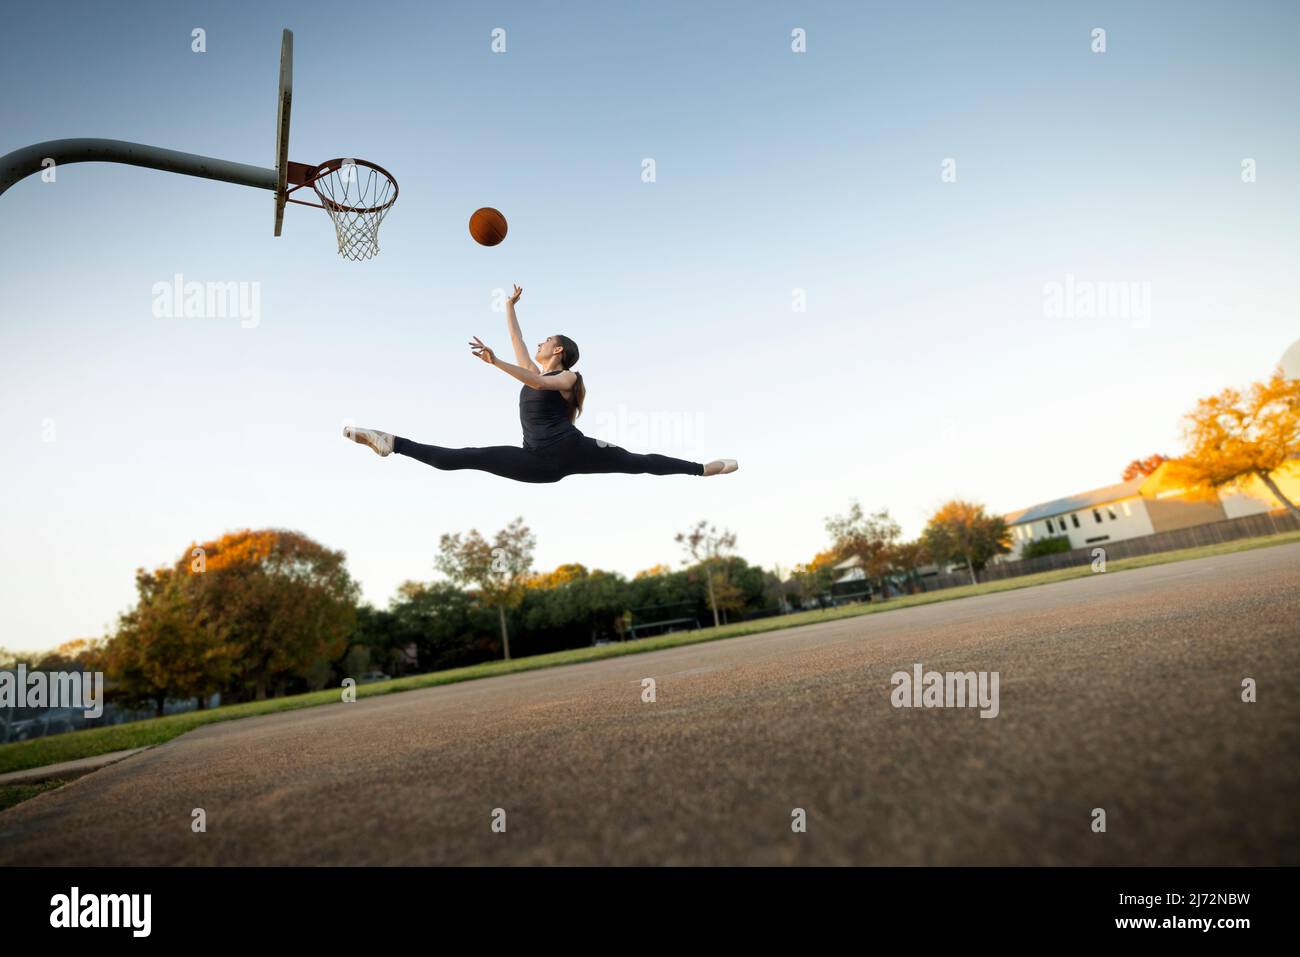 Ballet dancer mid-air jumping playing basketball on an outdoor court Stock Photo